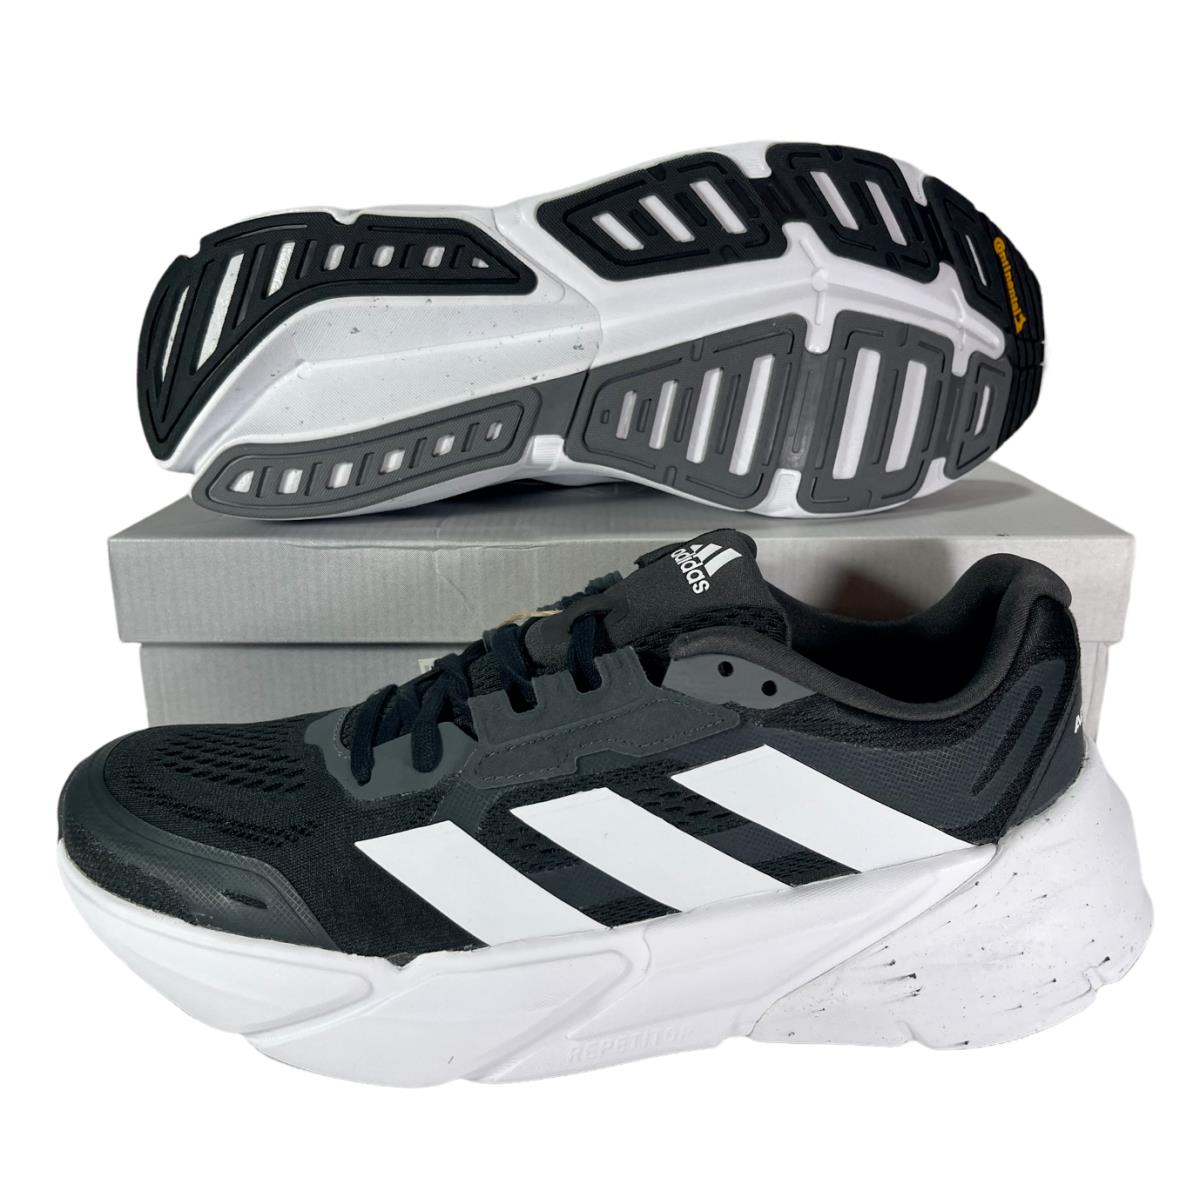 Adidas Solar Glide 5 Running Shoes Boost Men`s Sneakers Black/white GX5493